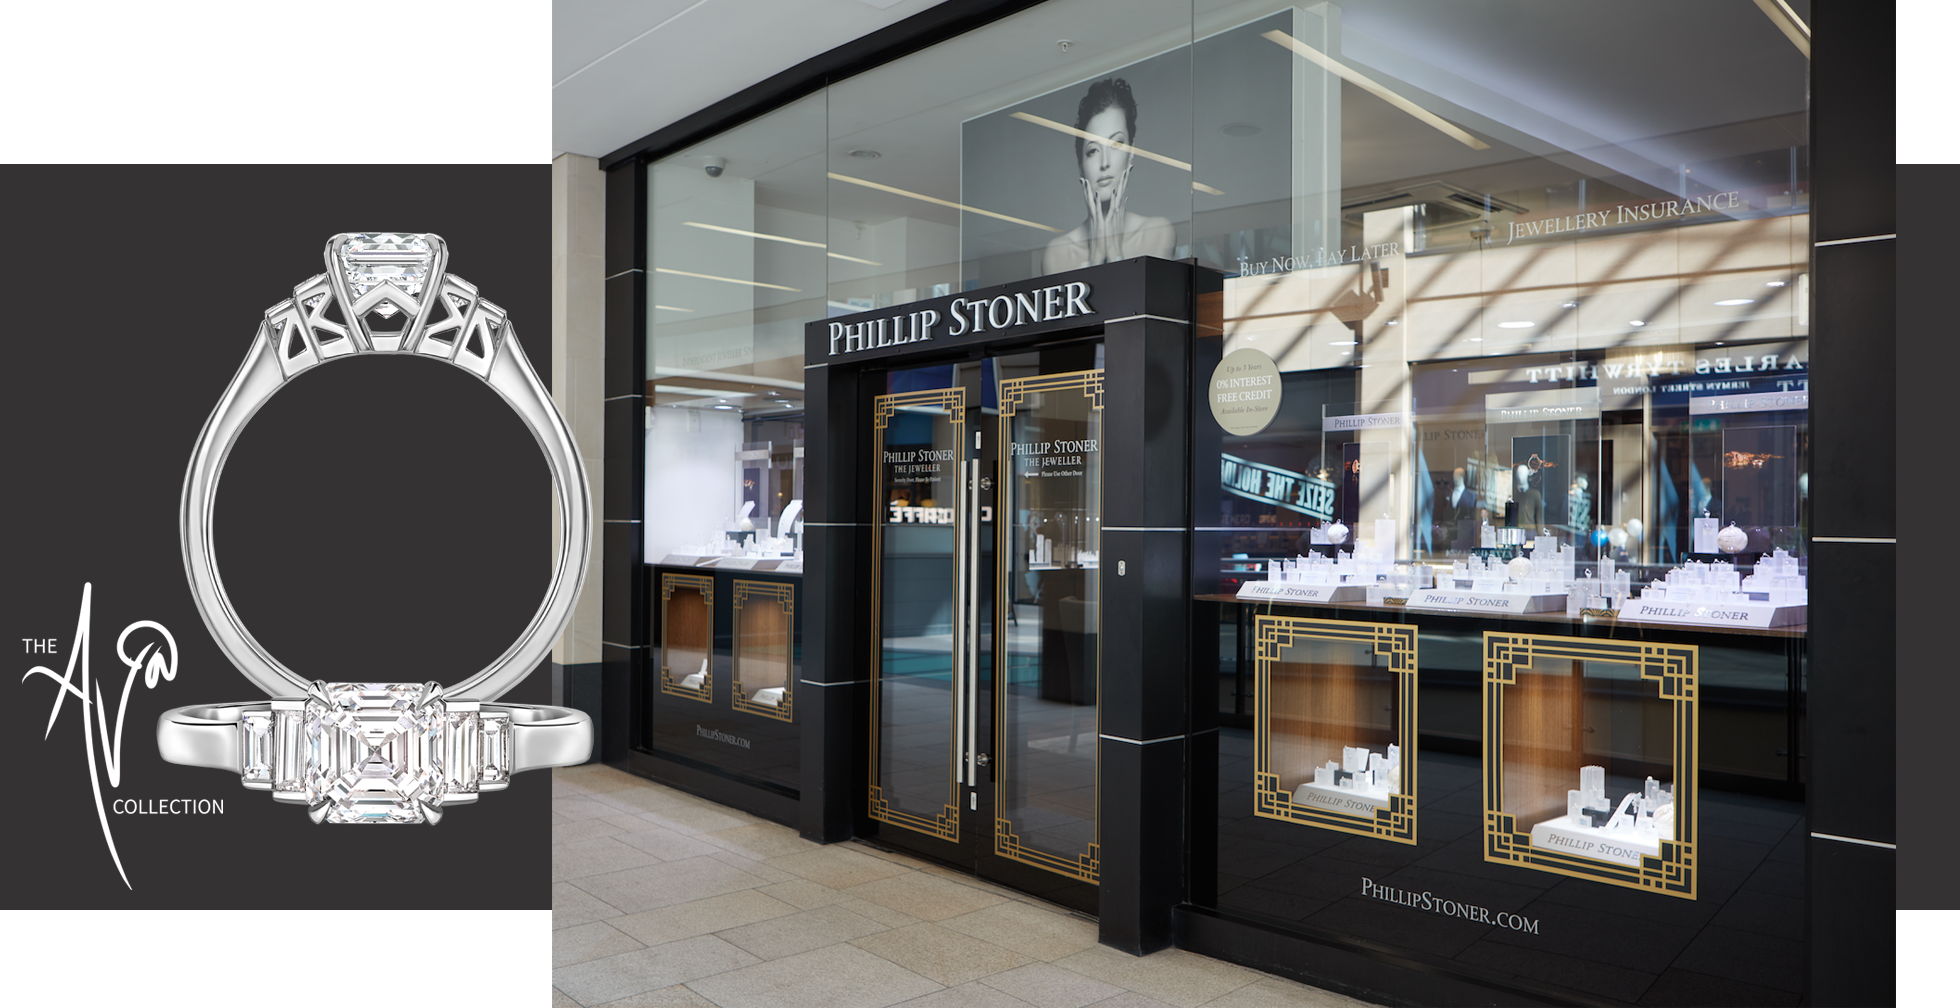 The Ava Collection - Art Deco Jewellery at Phillip Stoner